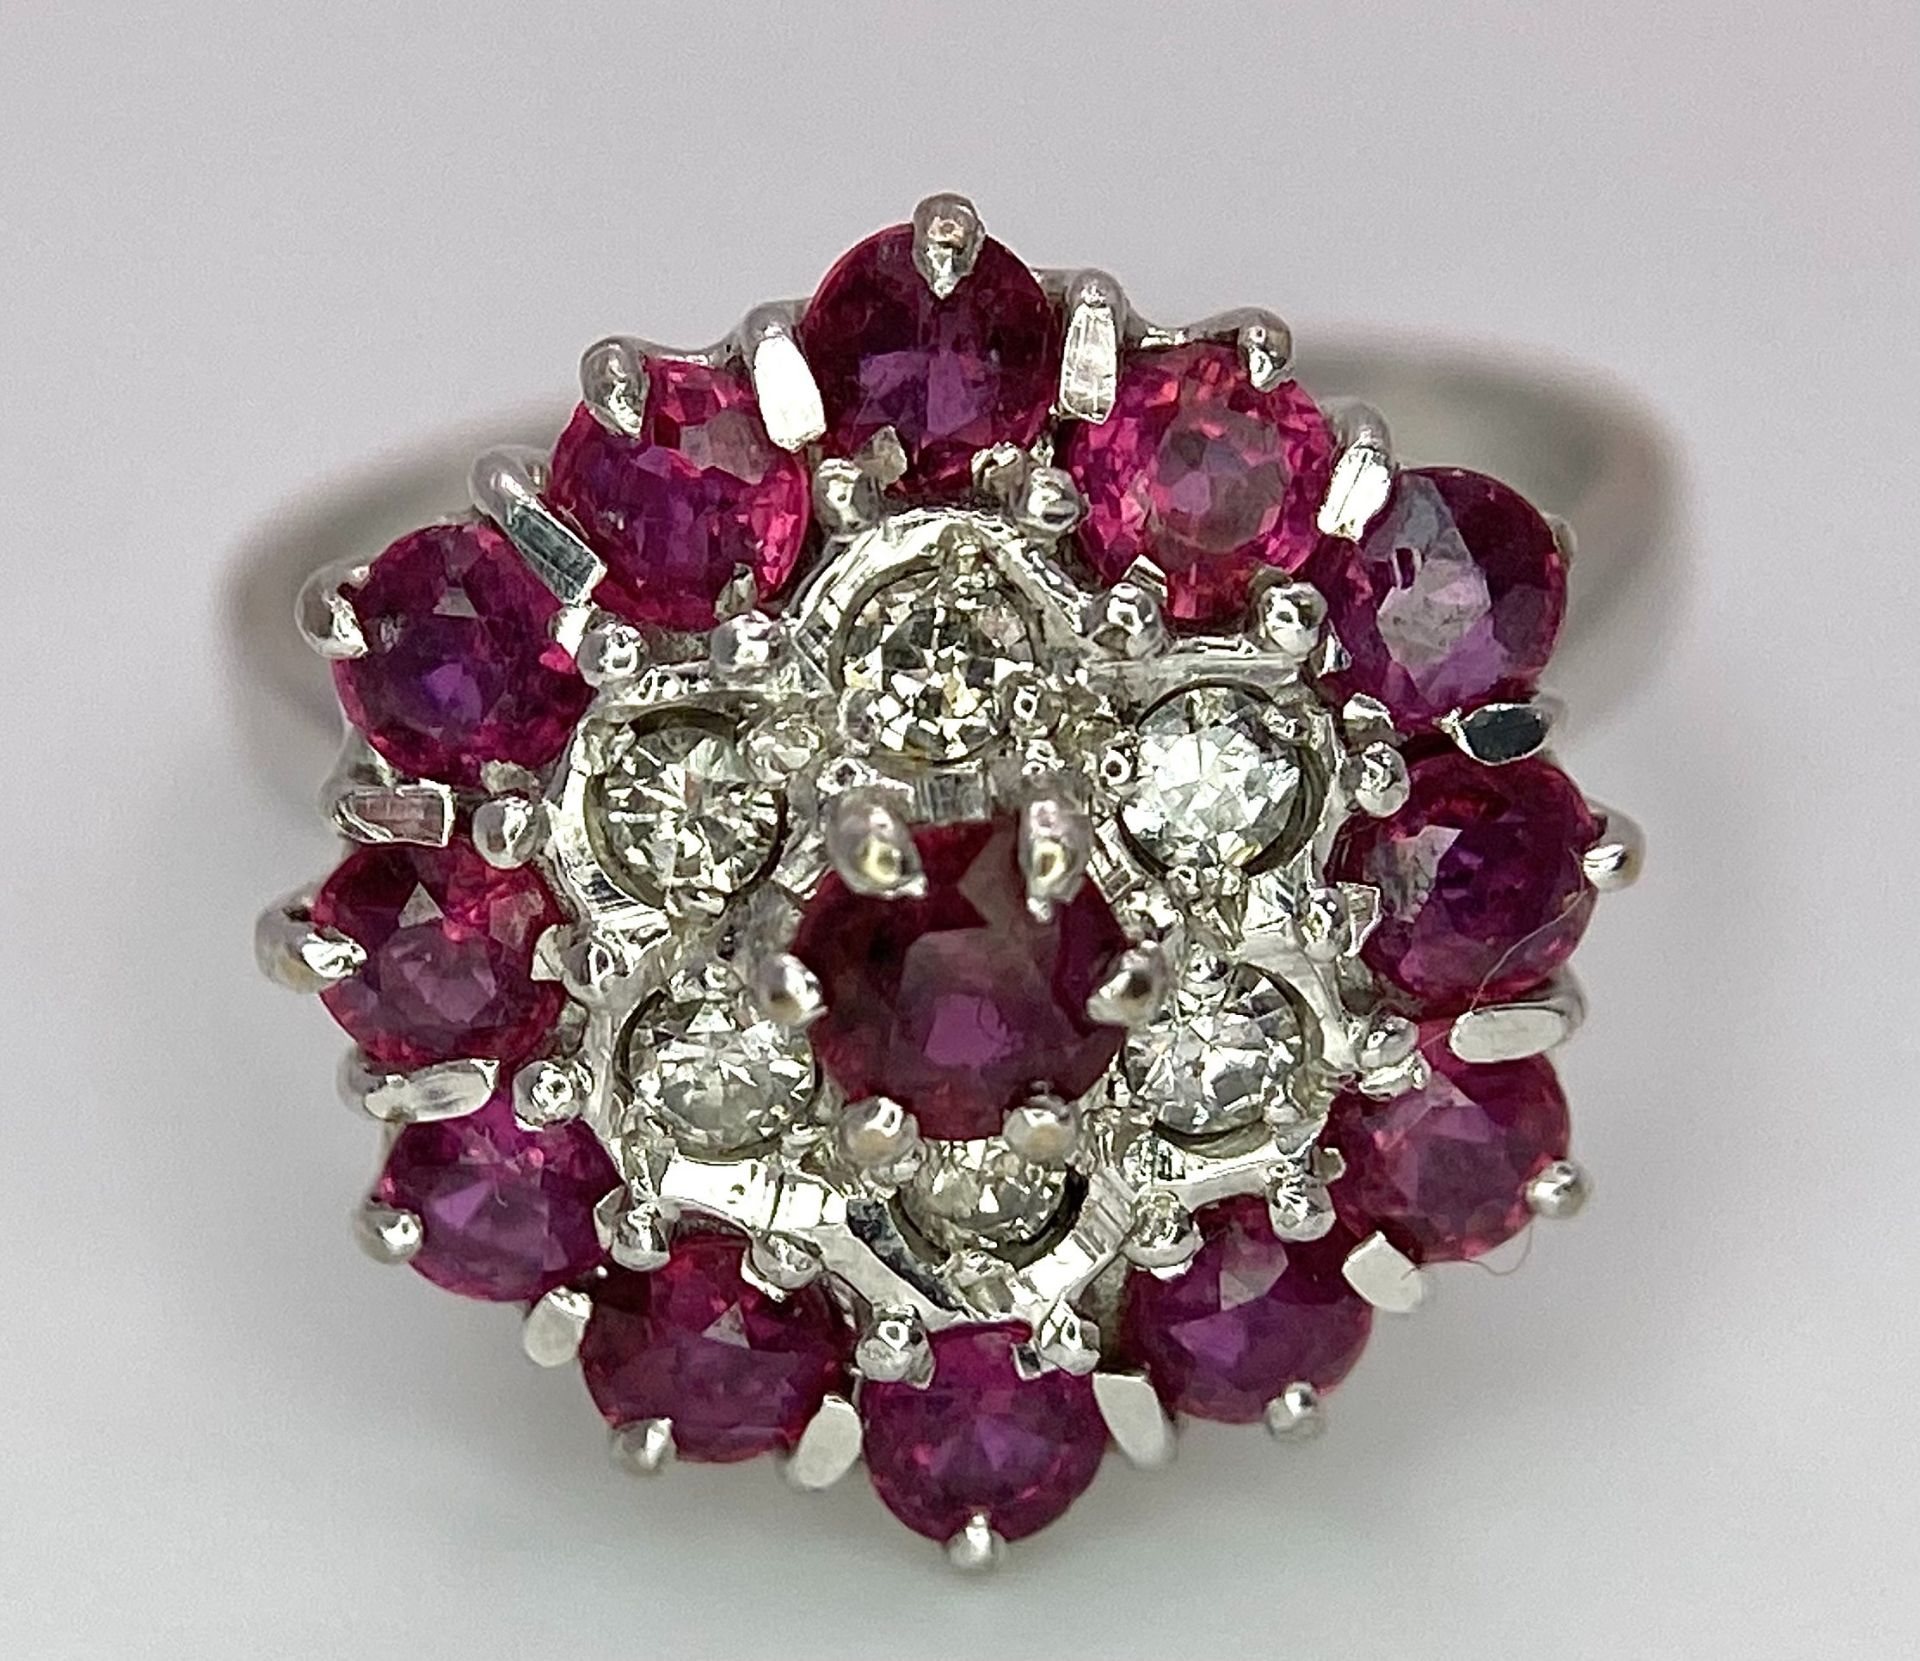 A Gorgeous 18K White Gold, Ruby and Diamond Ring. Floral design on an elevated setting. 14 rubies - Image 5 of 6